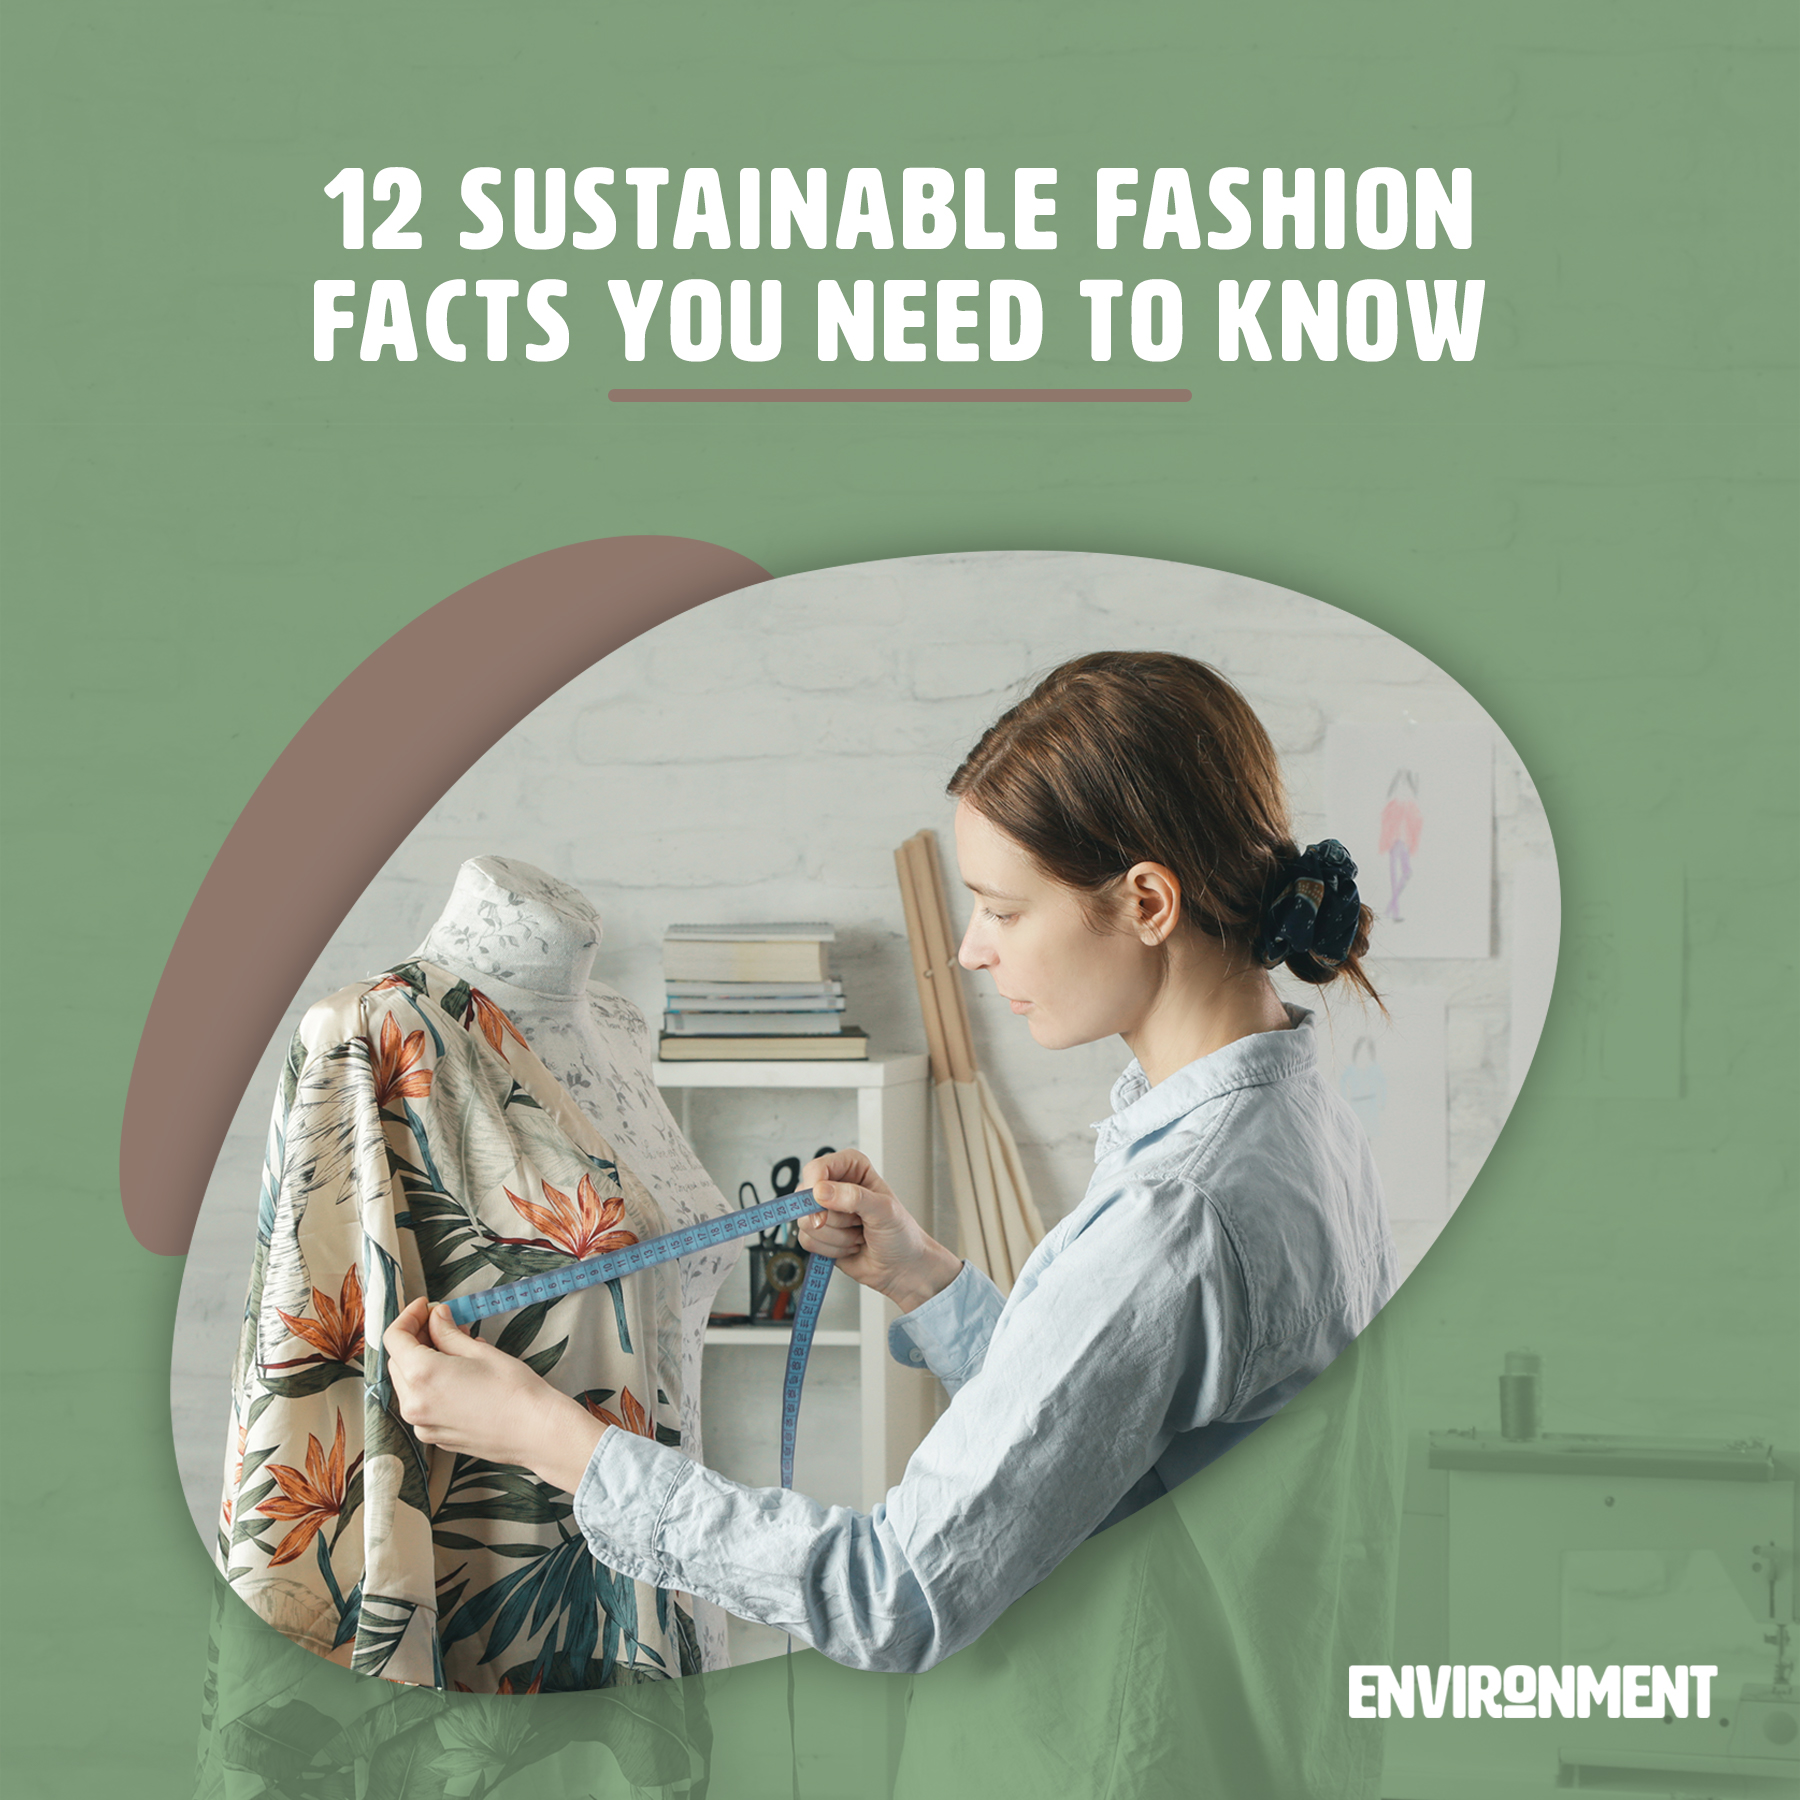 Sustainable Clothing Brands - The Questions You Need To Ask